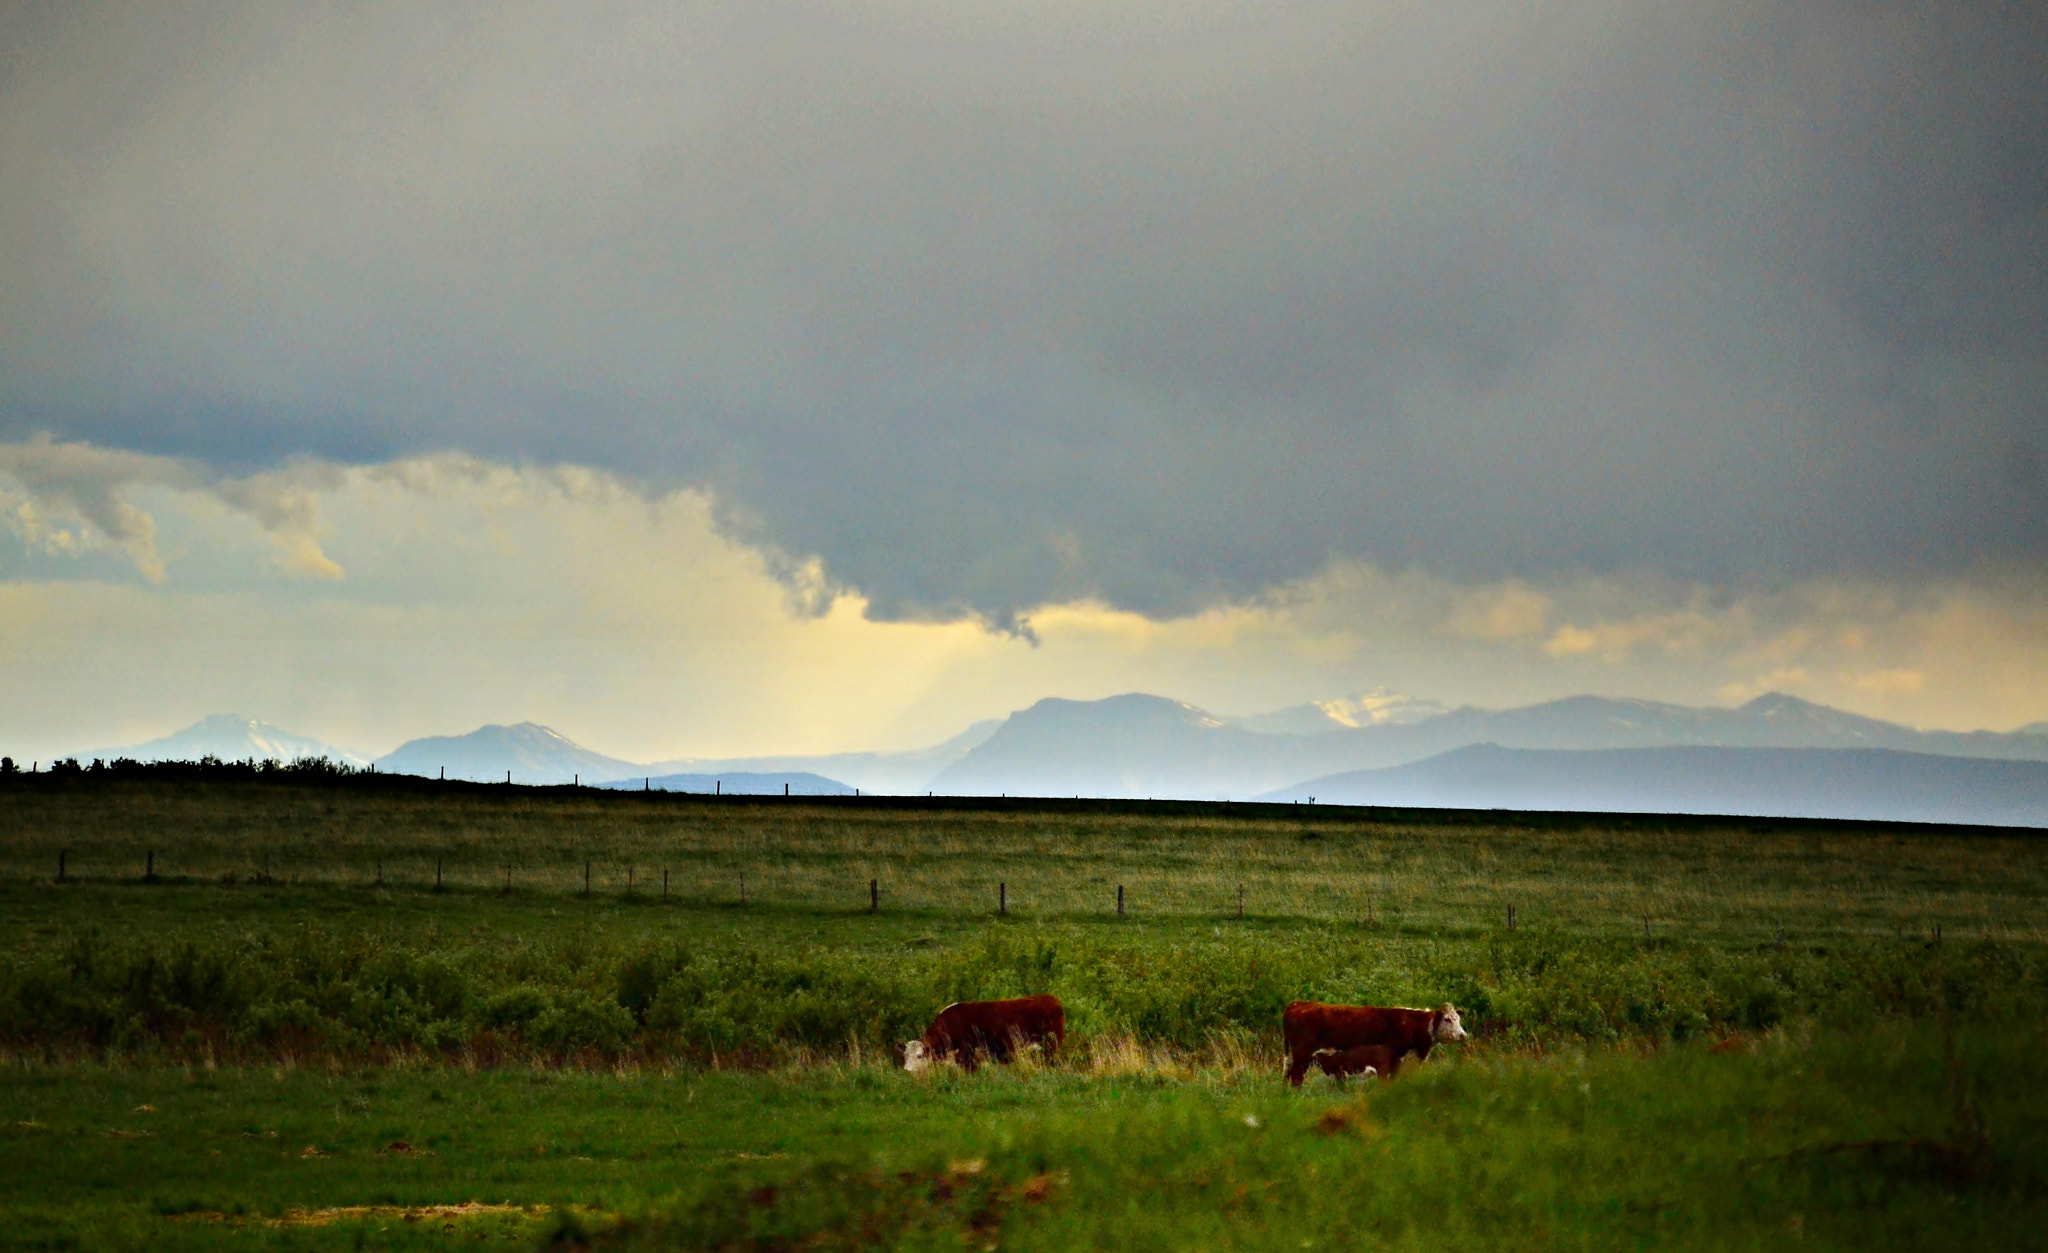 Nikon D3100 sample photo. View to the mountains, with cows, june 2018 photography